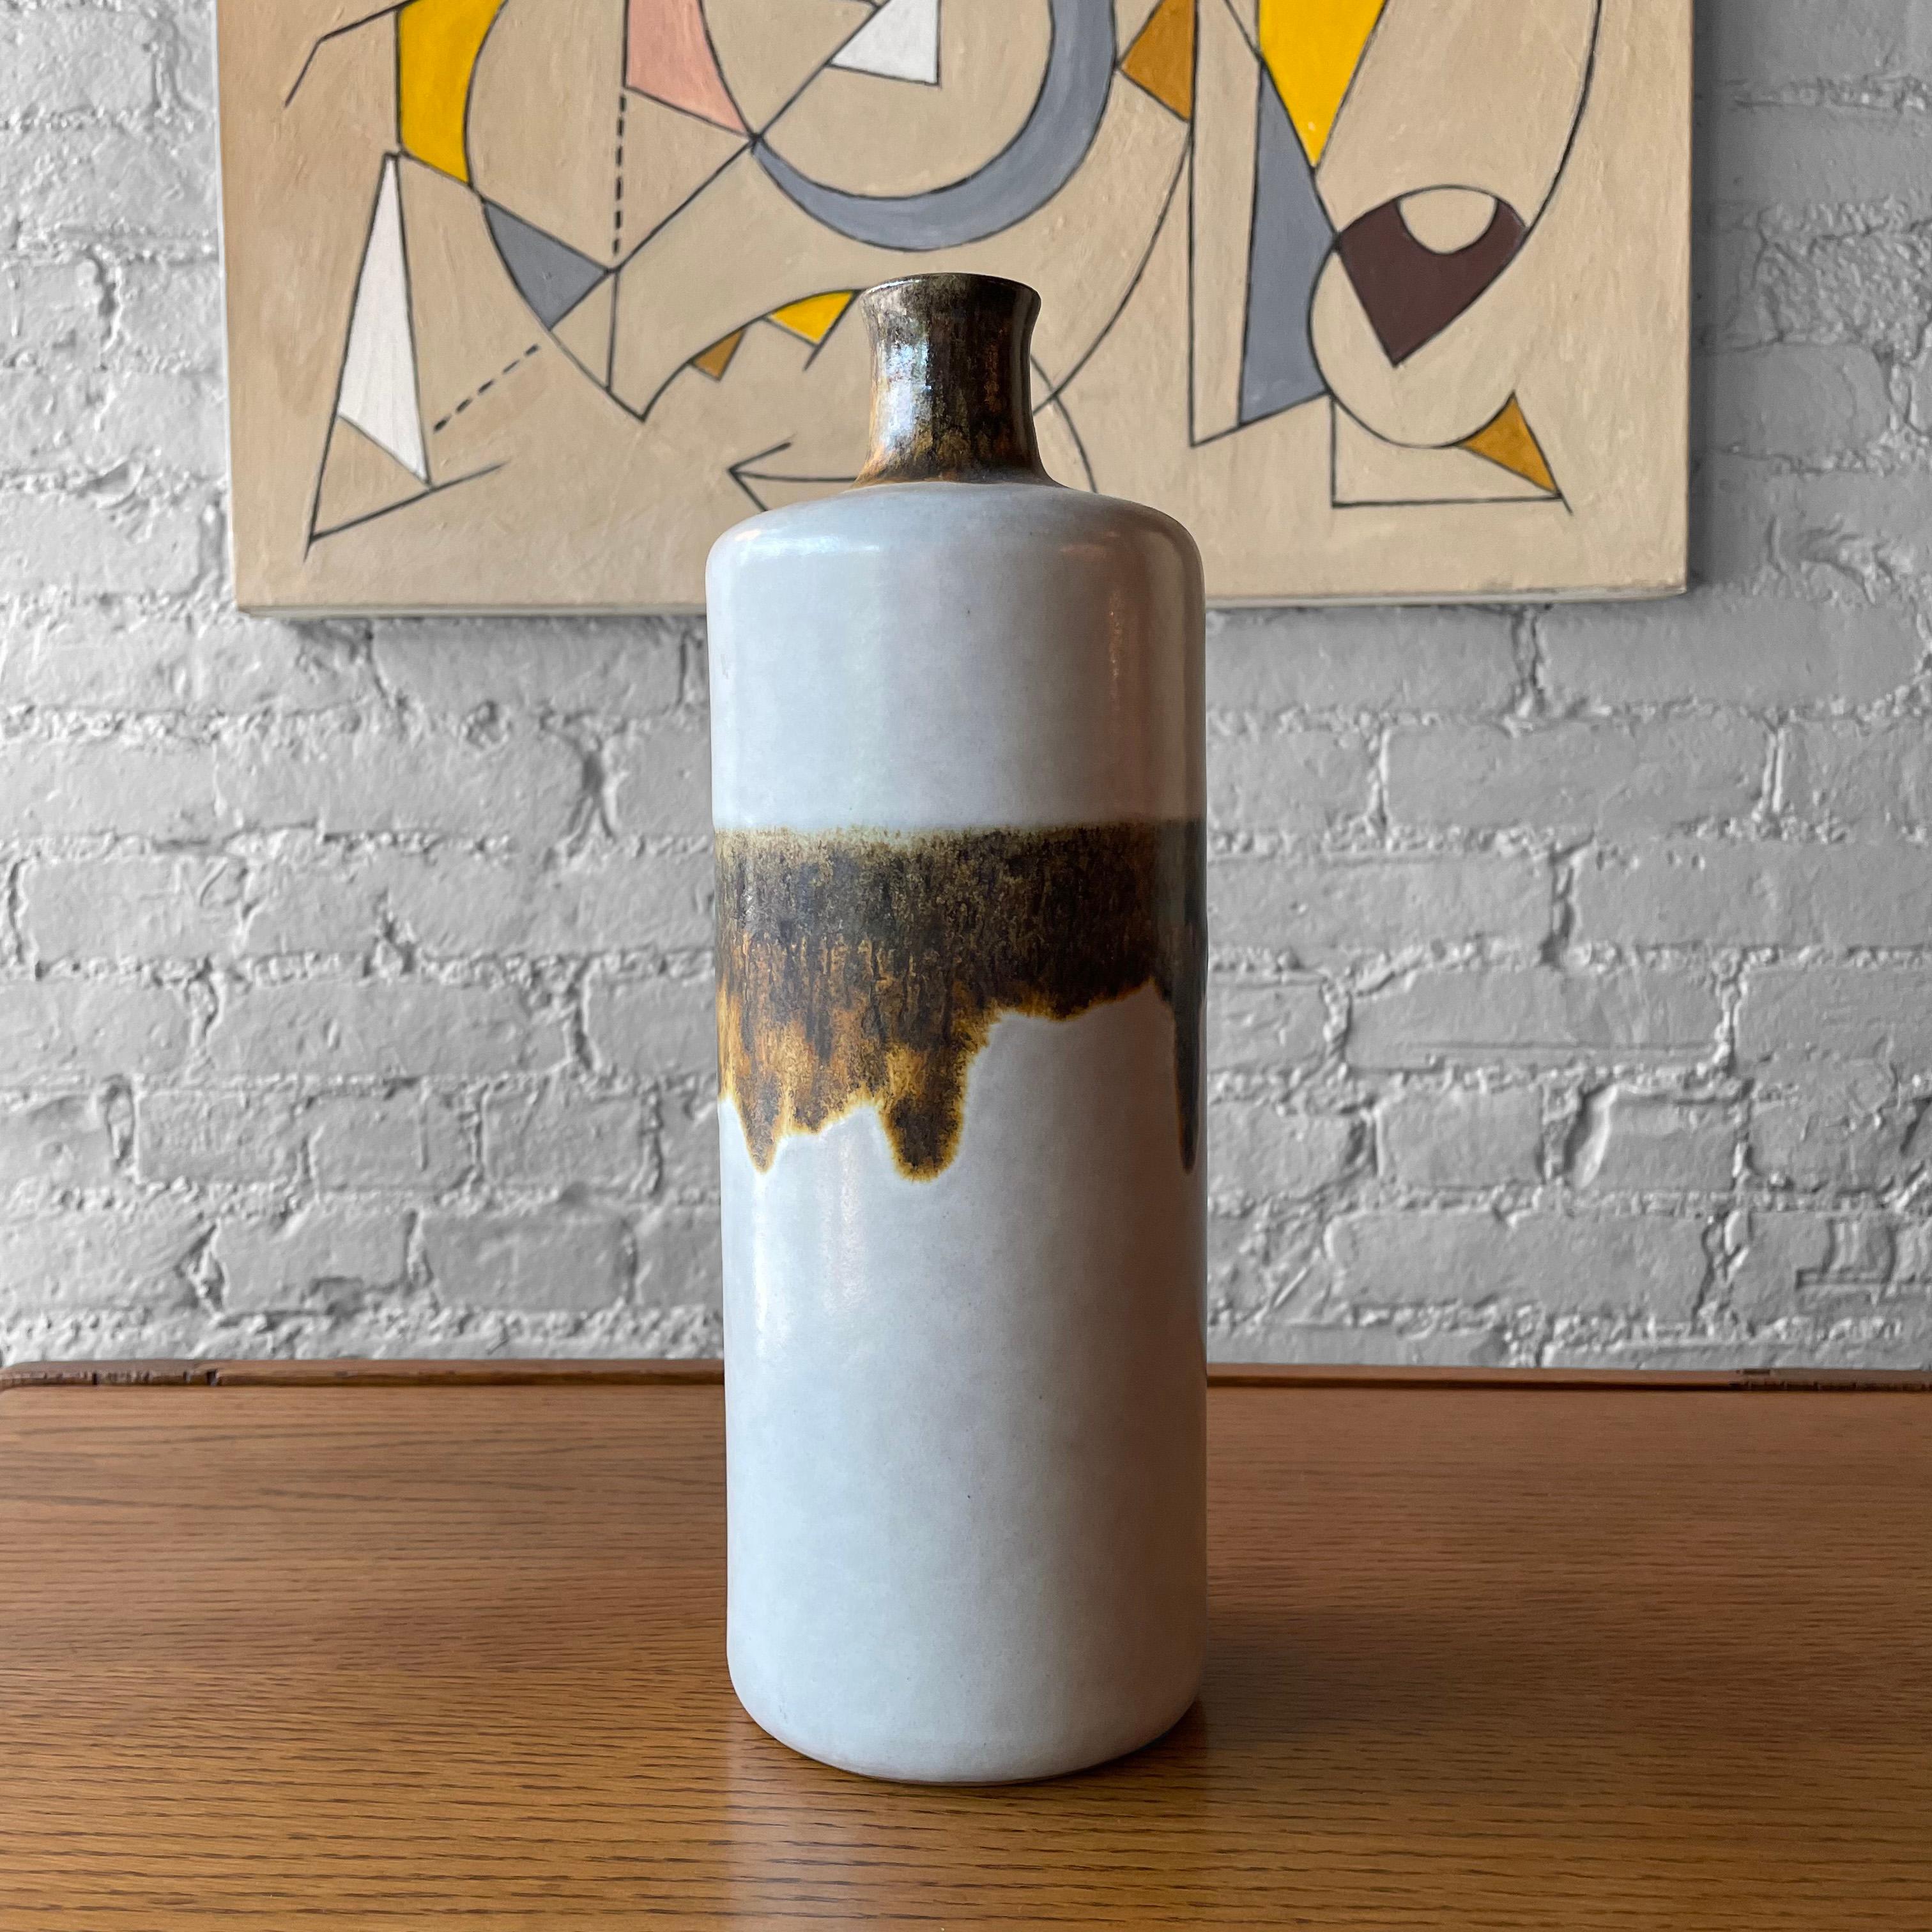 Italian, Mid-Century Modern, art pottery vase by Alvino Bagni for Raymor features an earthen tone drip glaze with a 1 inch opening.